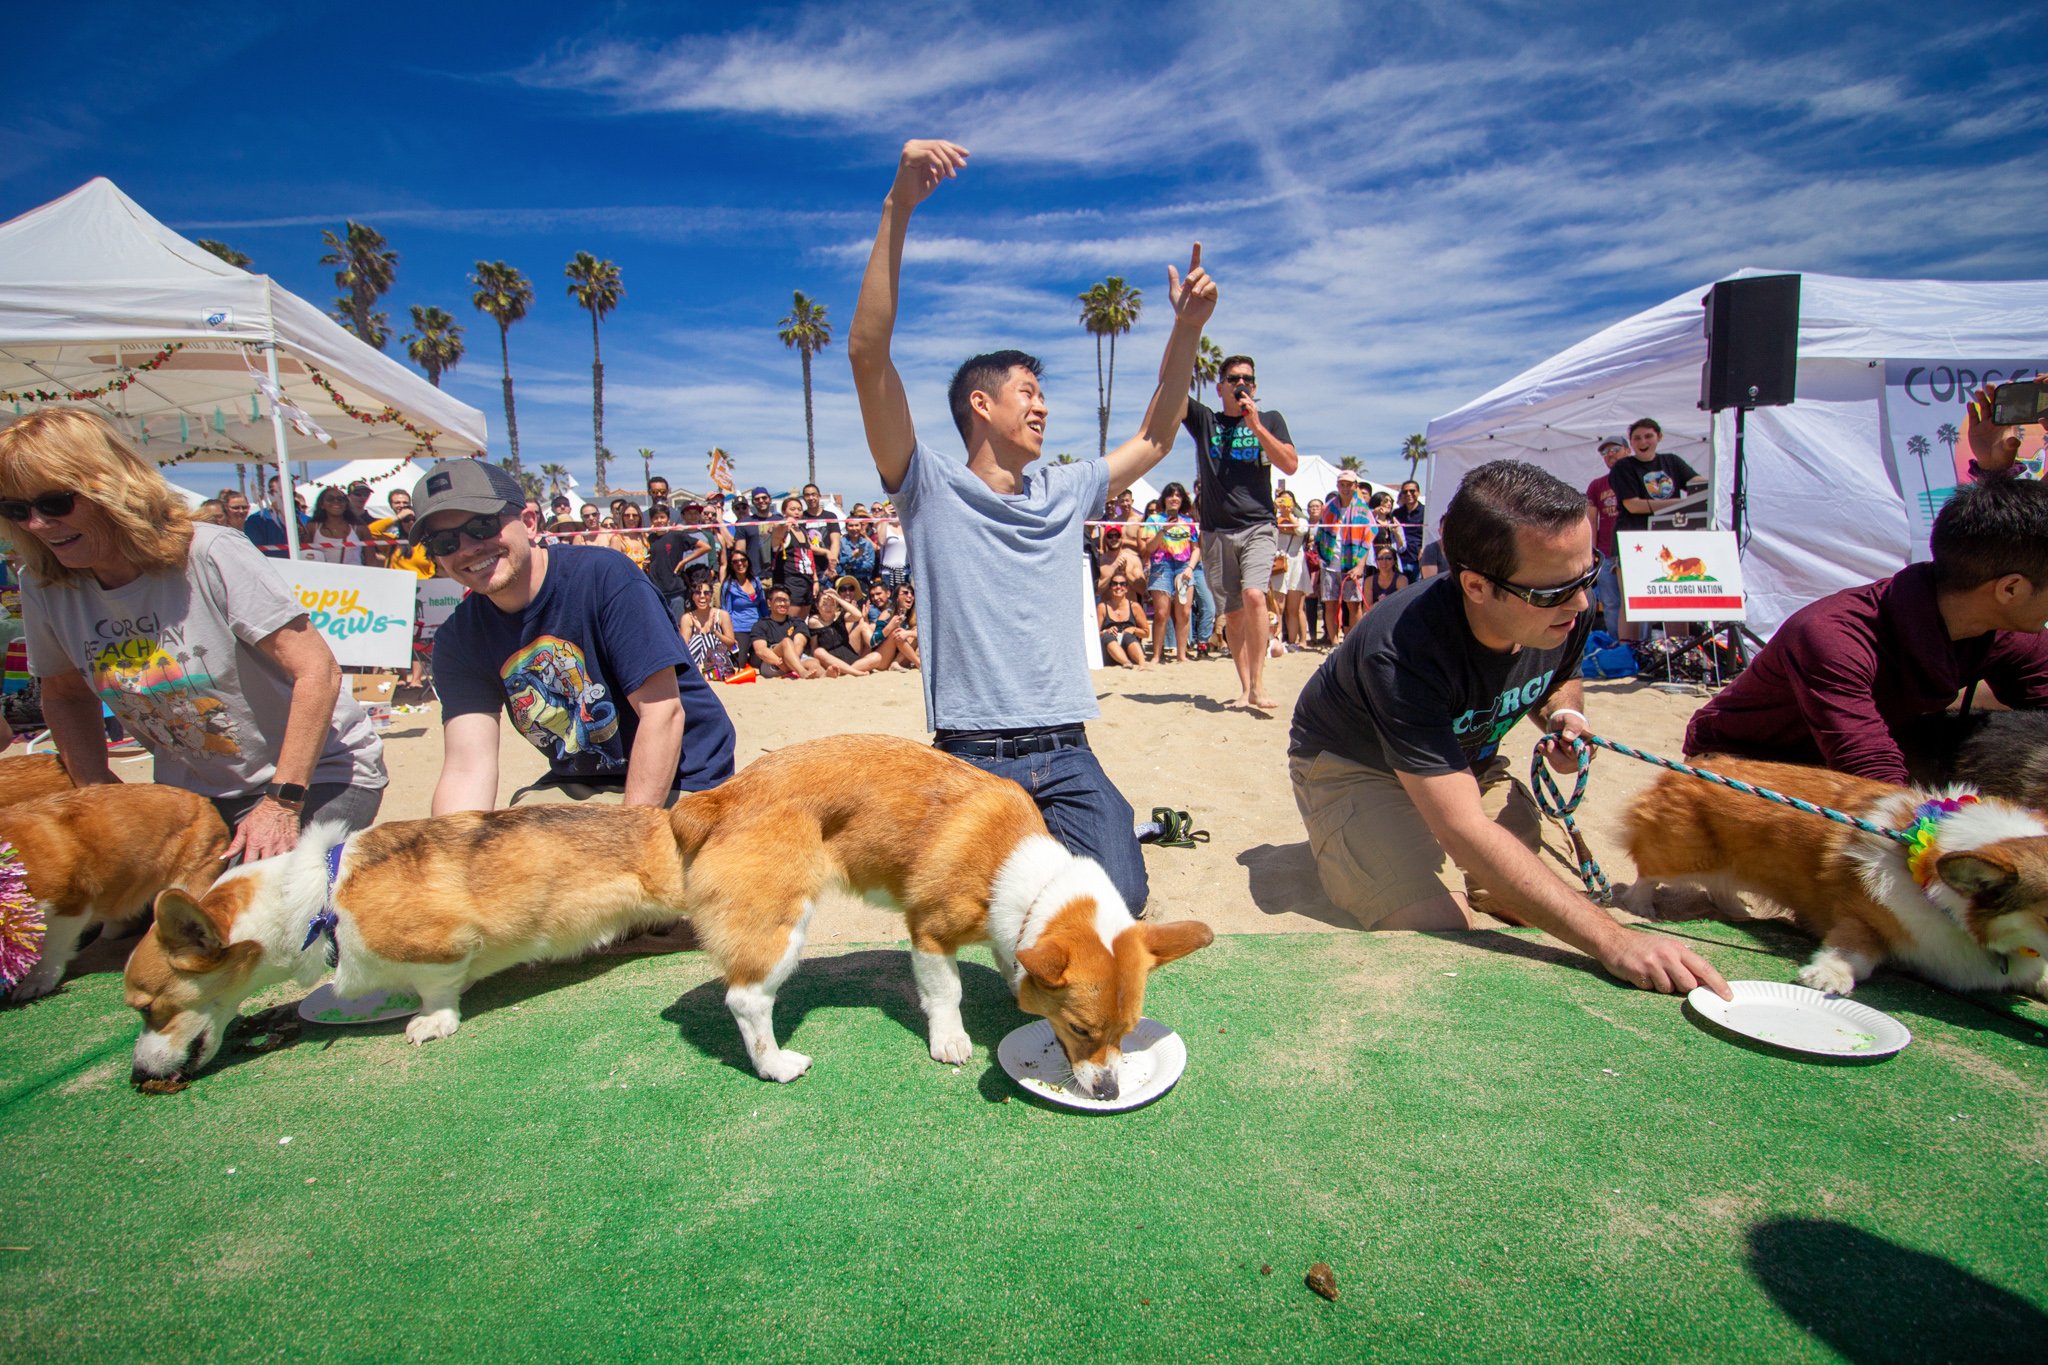 Orange County Pet and Dog Photography - by Steamer Lee - Corgi Beach Day Spring 2019 - Southern Caliornia 14.JPG